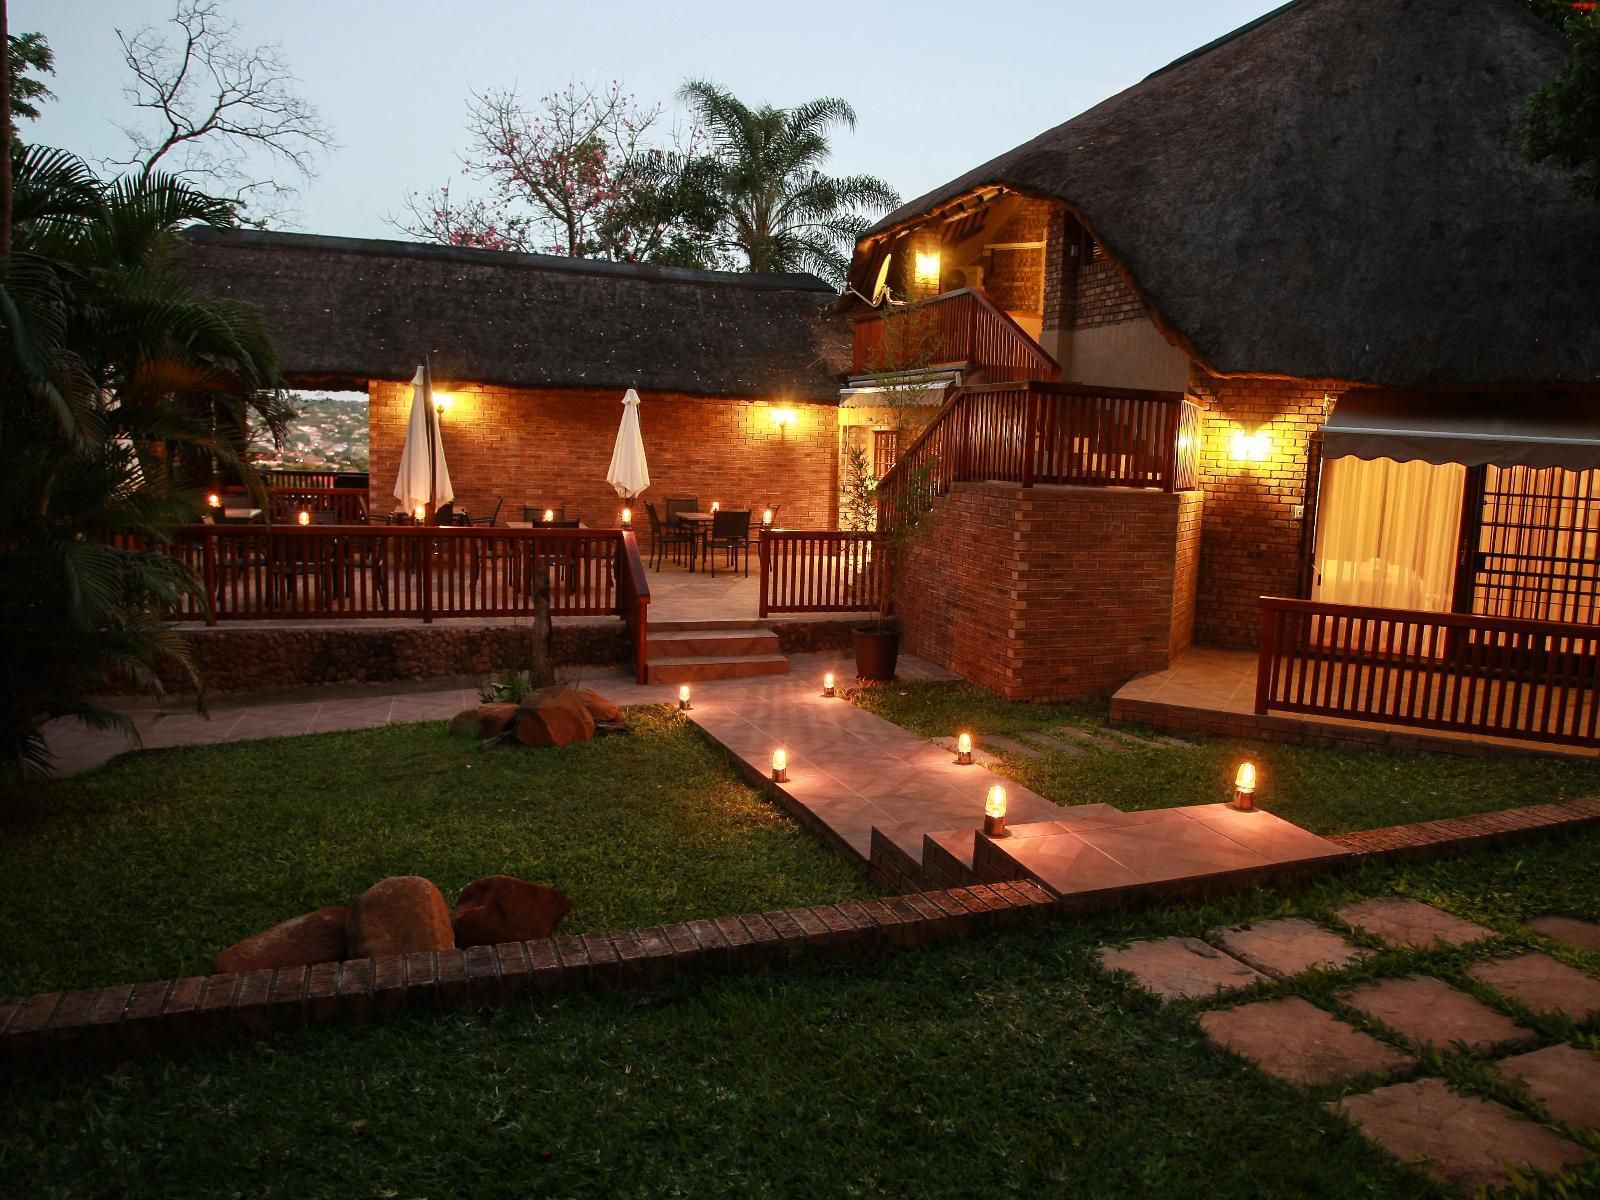 Woodlands Guest House Hazyview Mpumalanga South Africa House, Building, Architecture